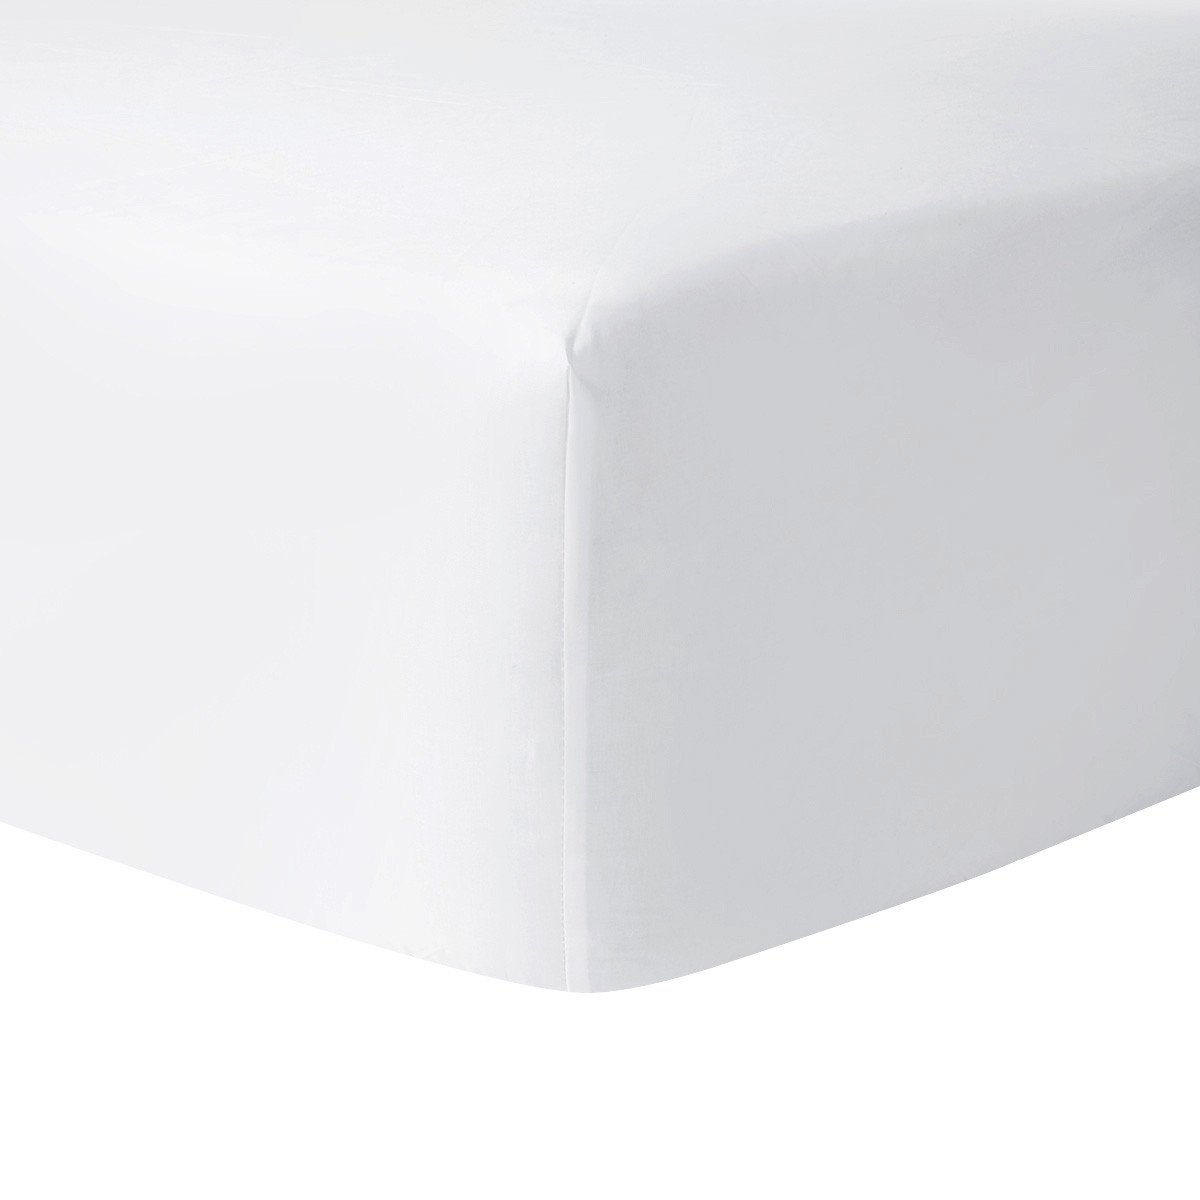 Athena Percale Bed Linens - Pioneer Linens